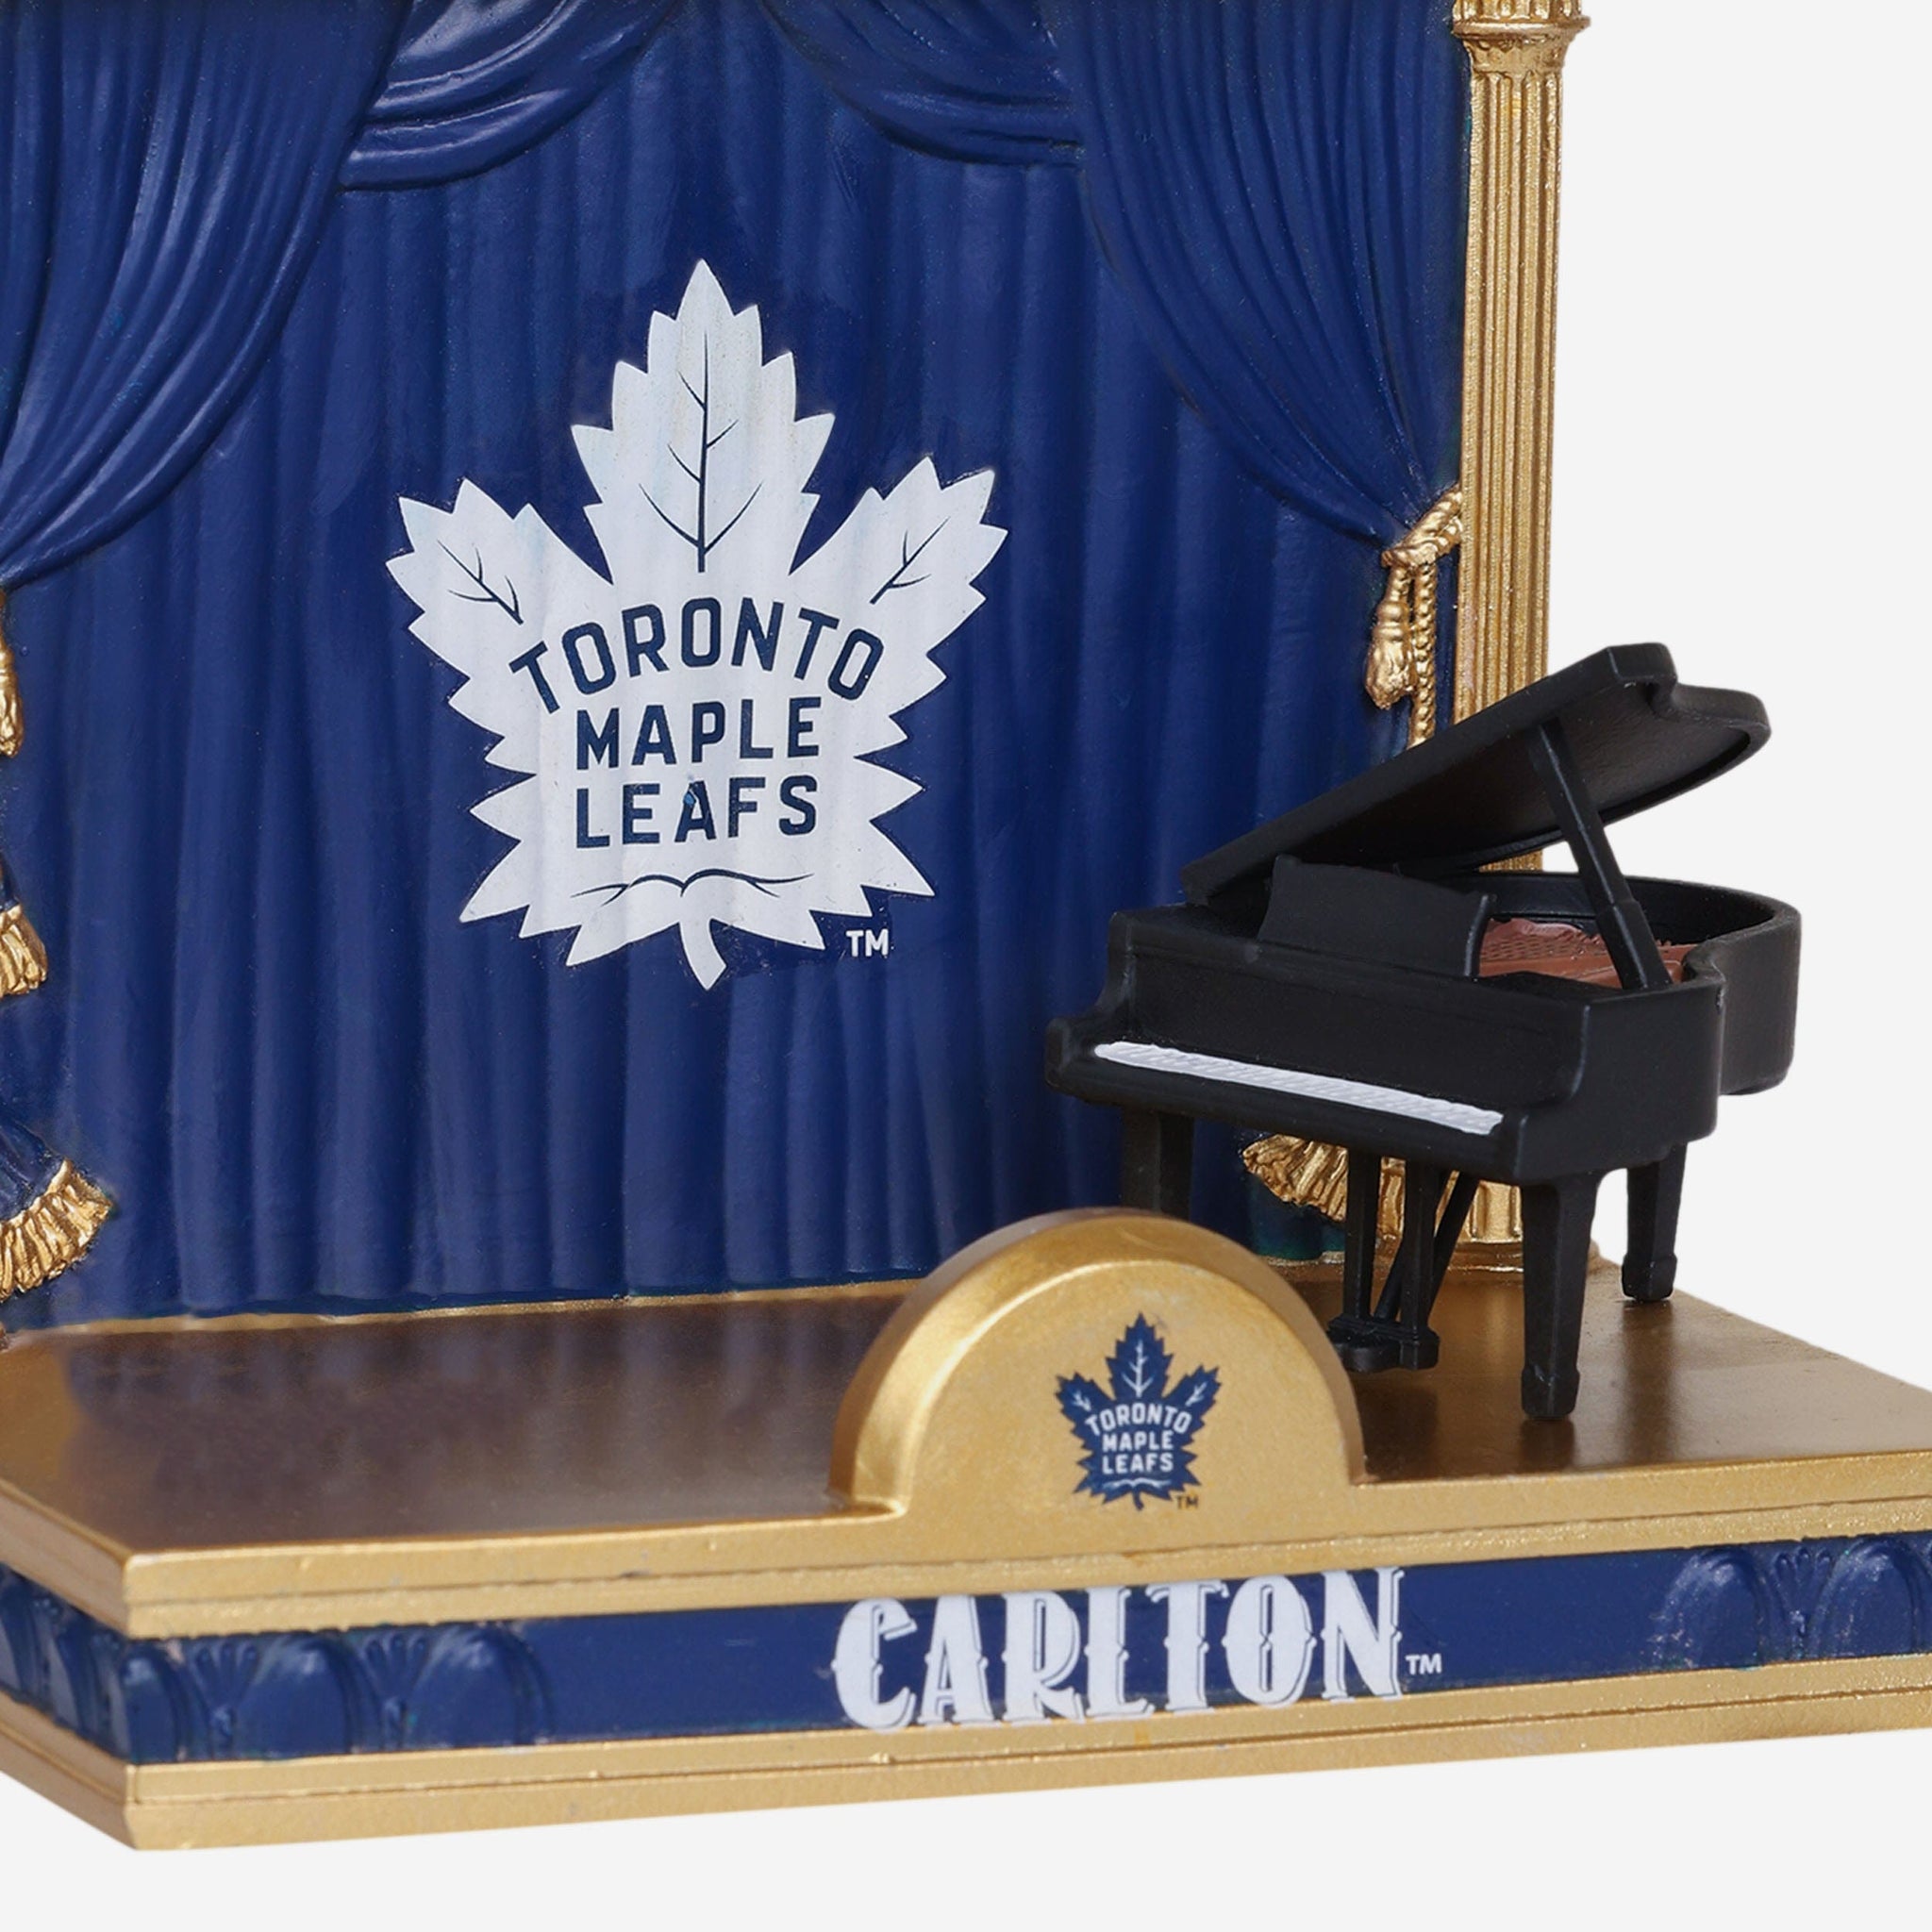 Carlton The Bear Toronto Maple Leafs Mascot Heritage Classic Bobblehead Officially Licensed by NHL